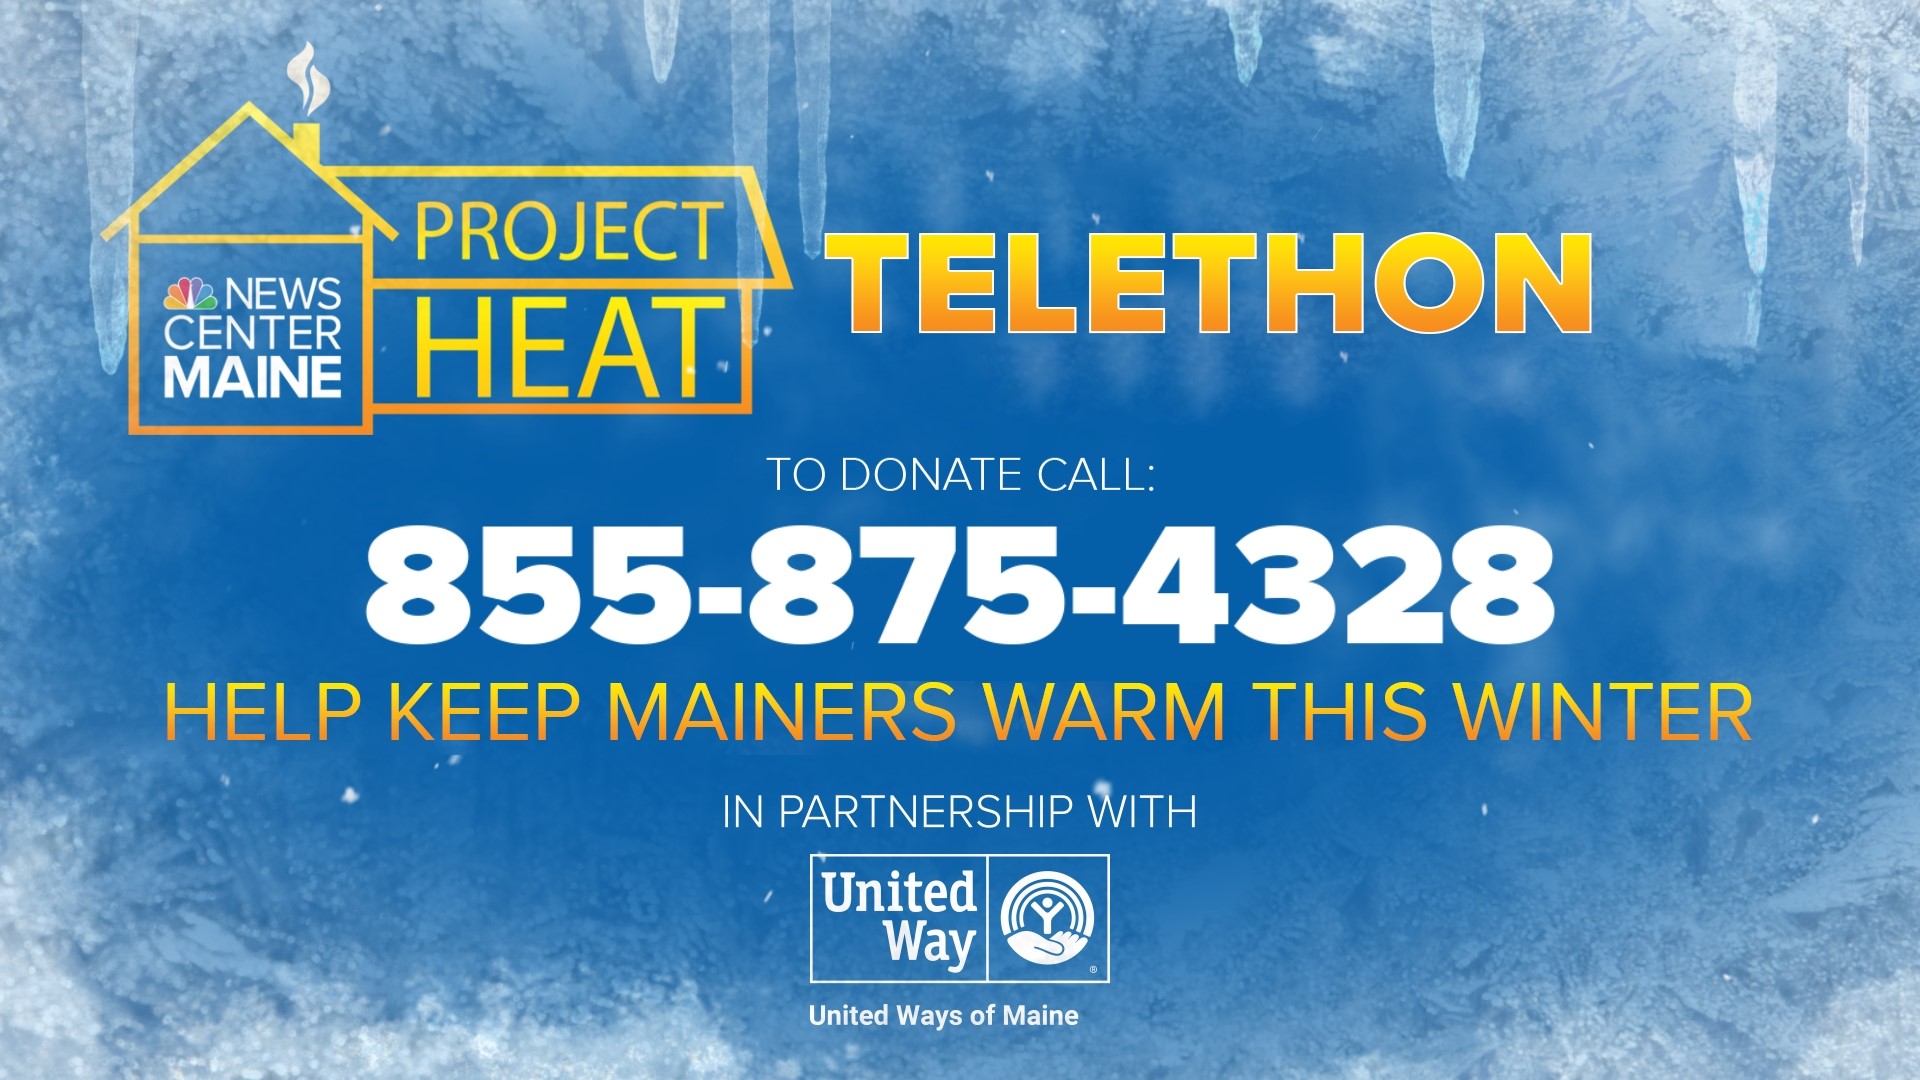 NEWS CENTER Maine is hosting its annual Project Heat telethon with the United Ways of Maine on Thursday, January 20, 2022 from 5 a.m. to 8 p.m.